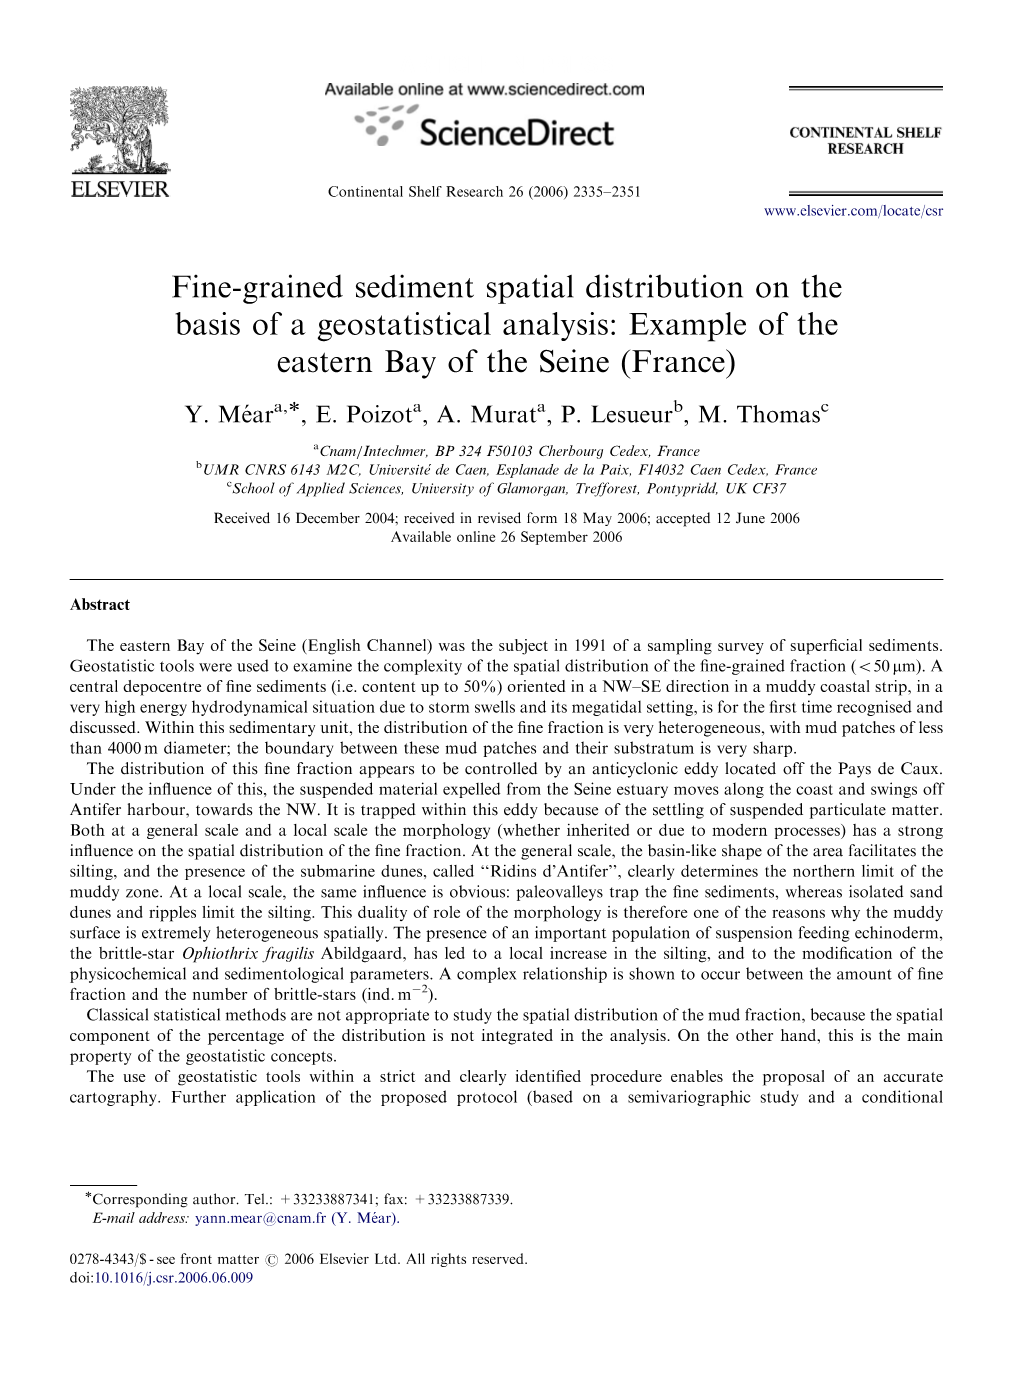 Fine-Grained Sediment Spatial Distribution on the Basis of a Geostatistical Analysis: Example of the Eastern Bay of the Seine (France)